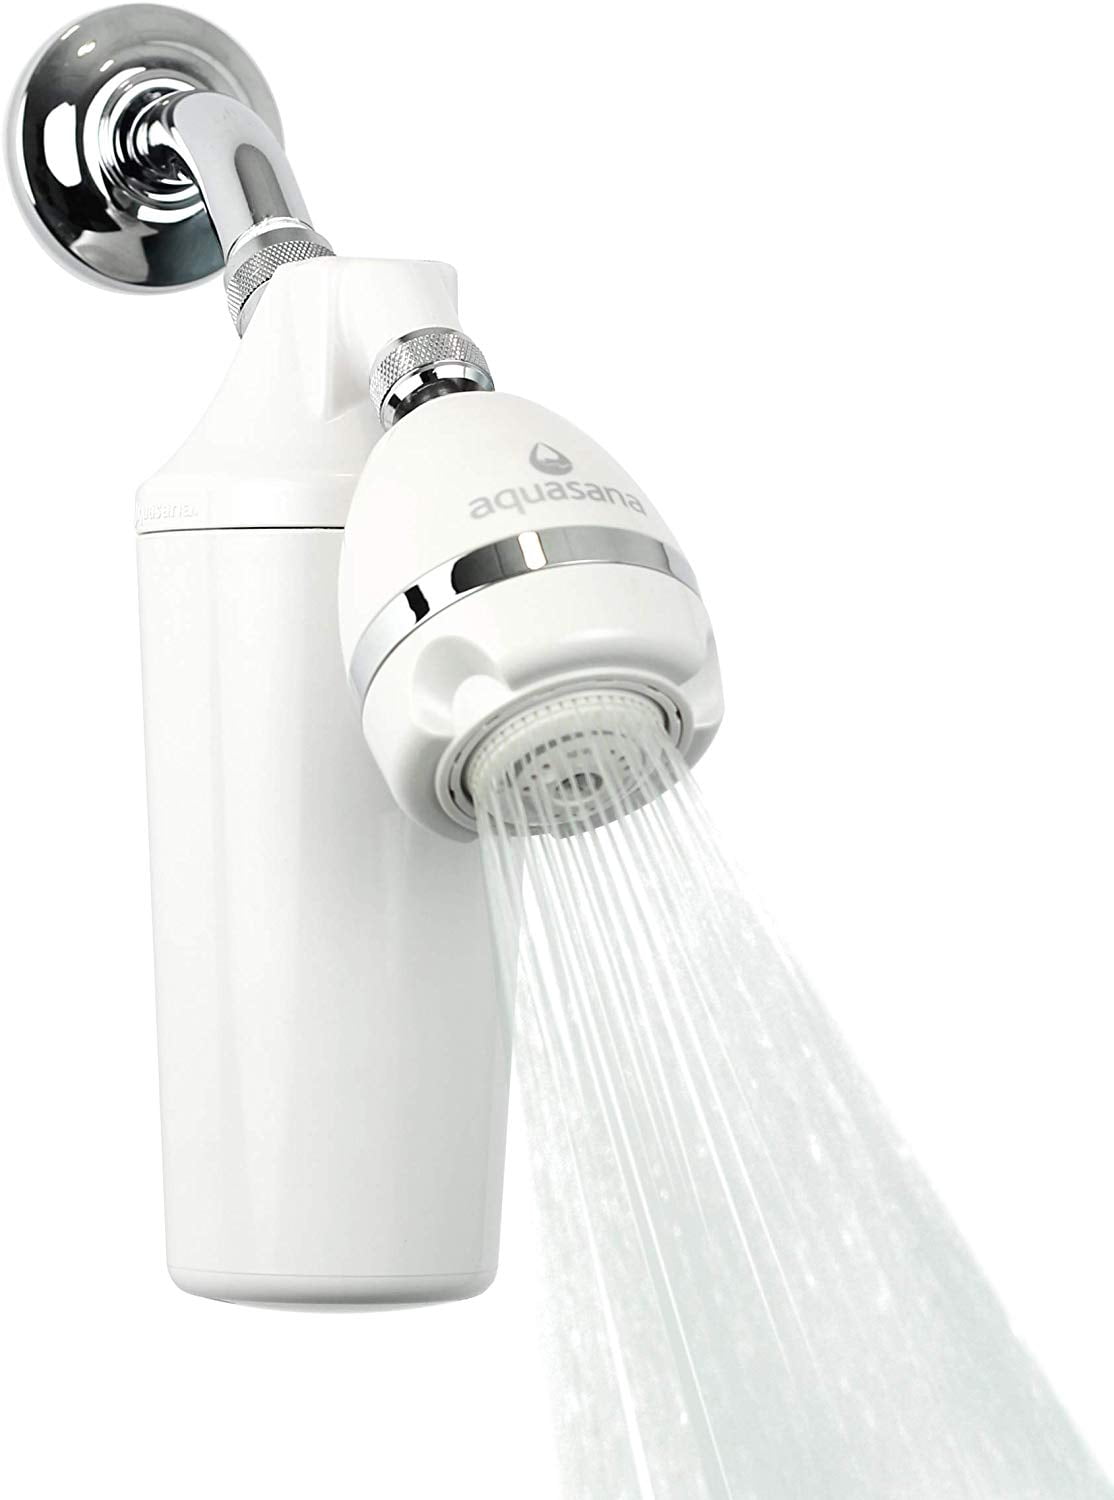 Aquasana Shower Water Filter System W/ Handheld Massaging Filters Over 90% Of 